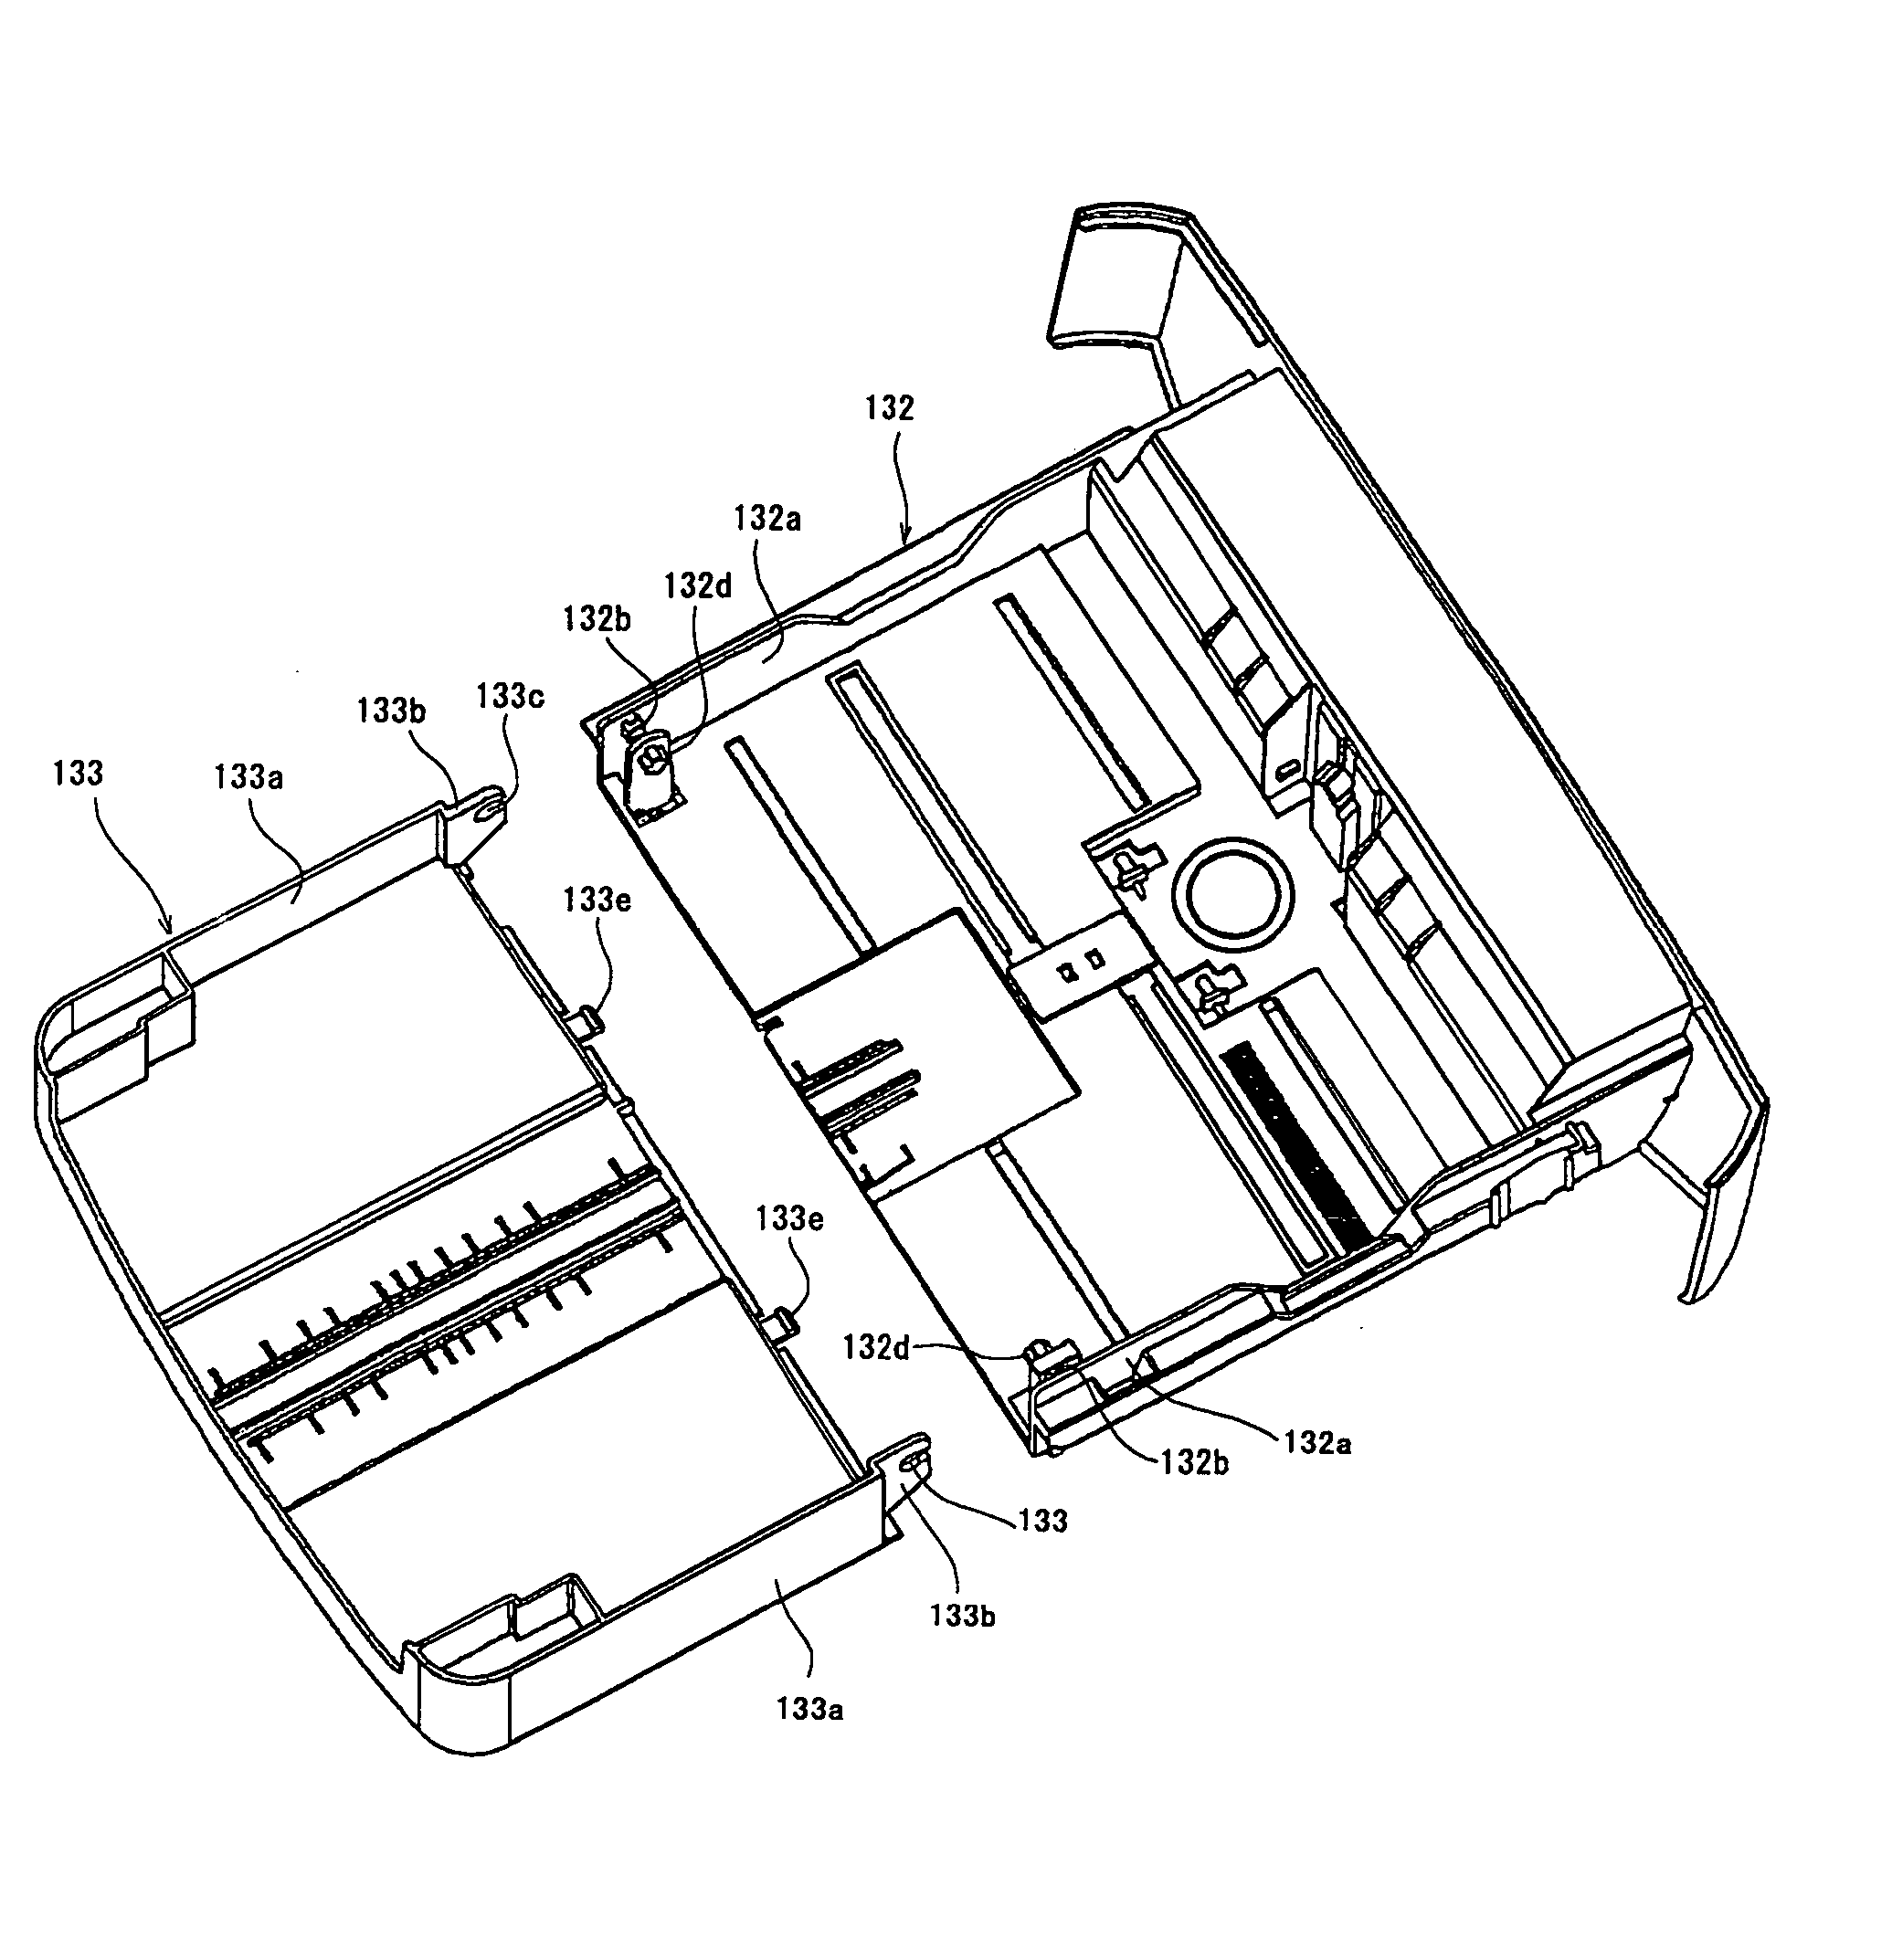 Paper feed cassette for image forming apparatus